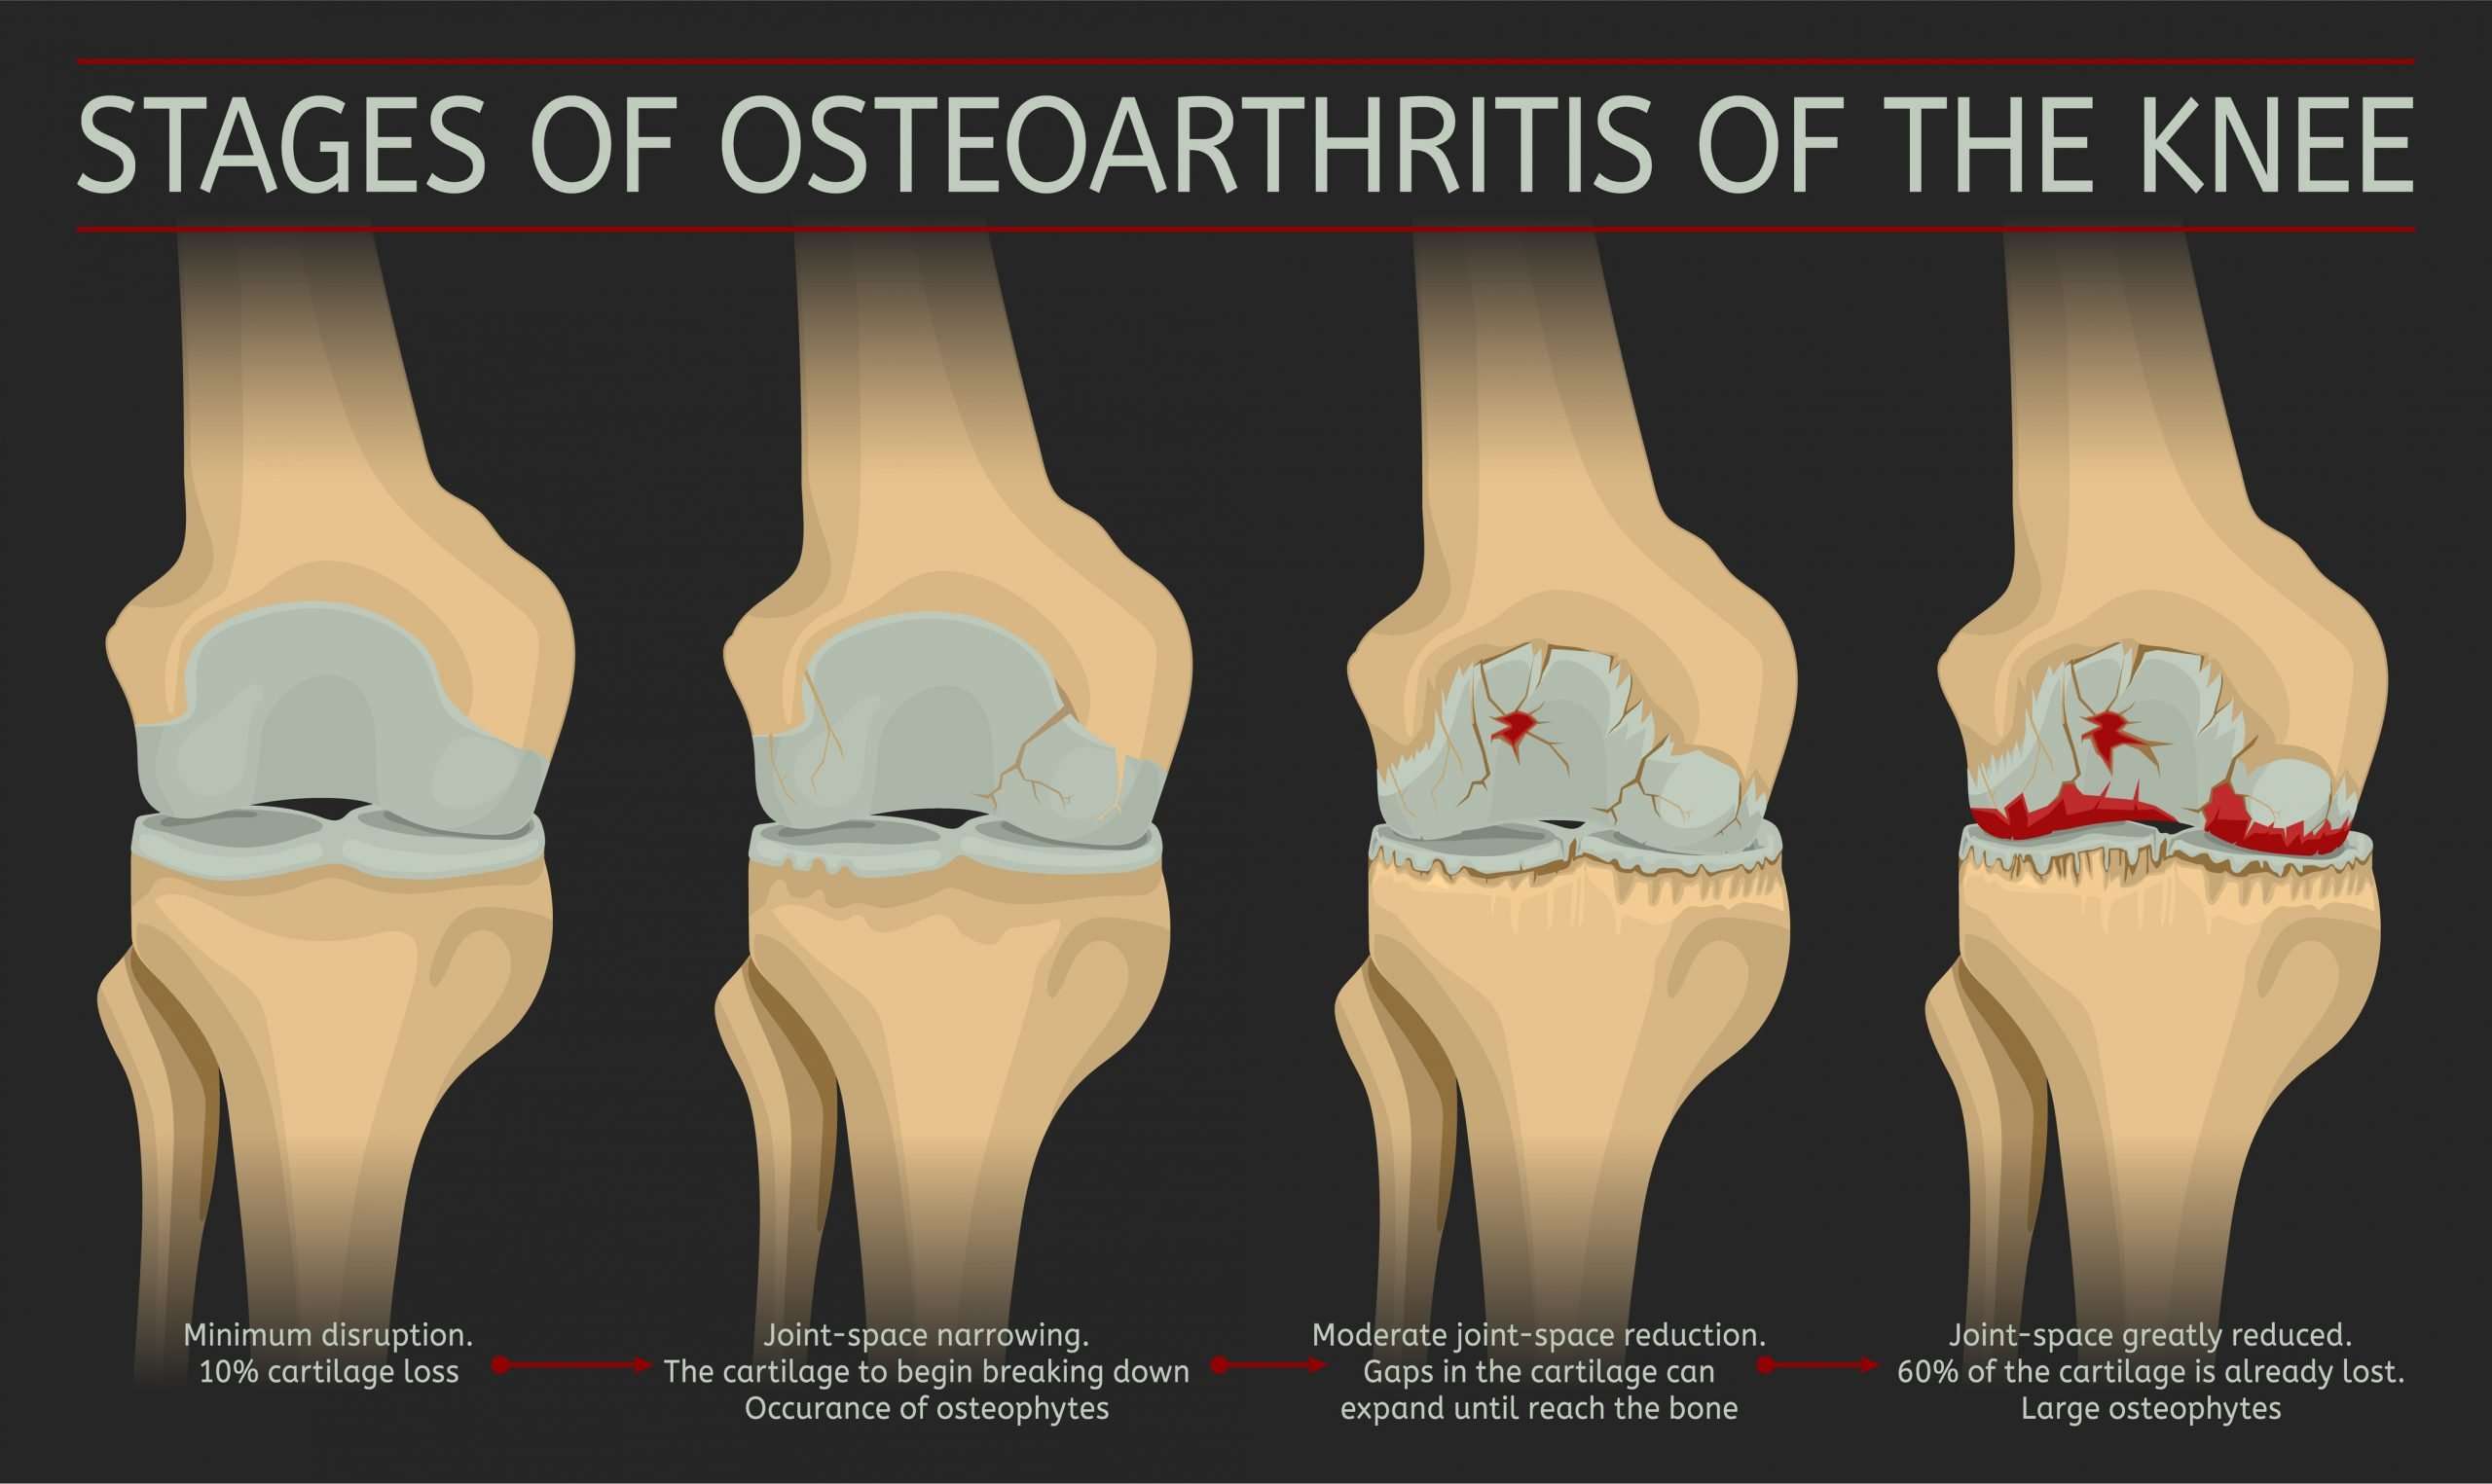 10 Recommendations To Thrive With Osteoarthritis of the Knee